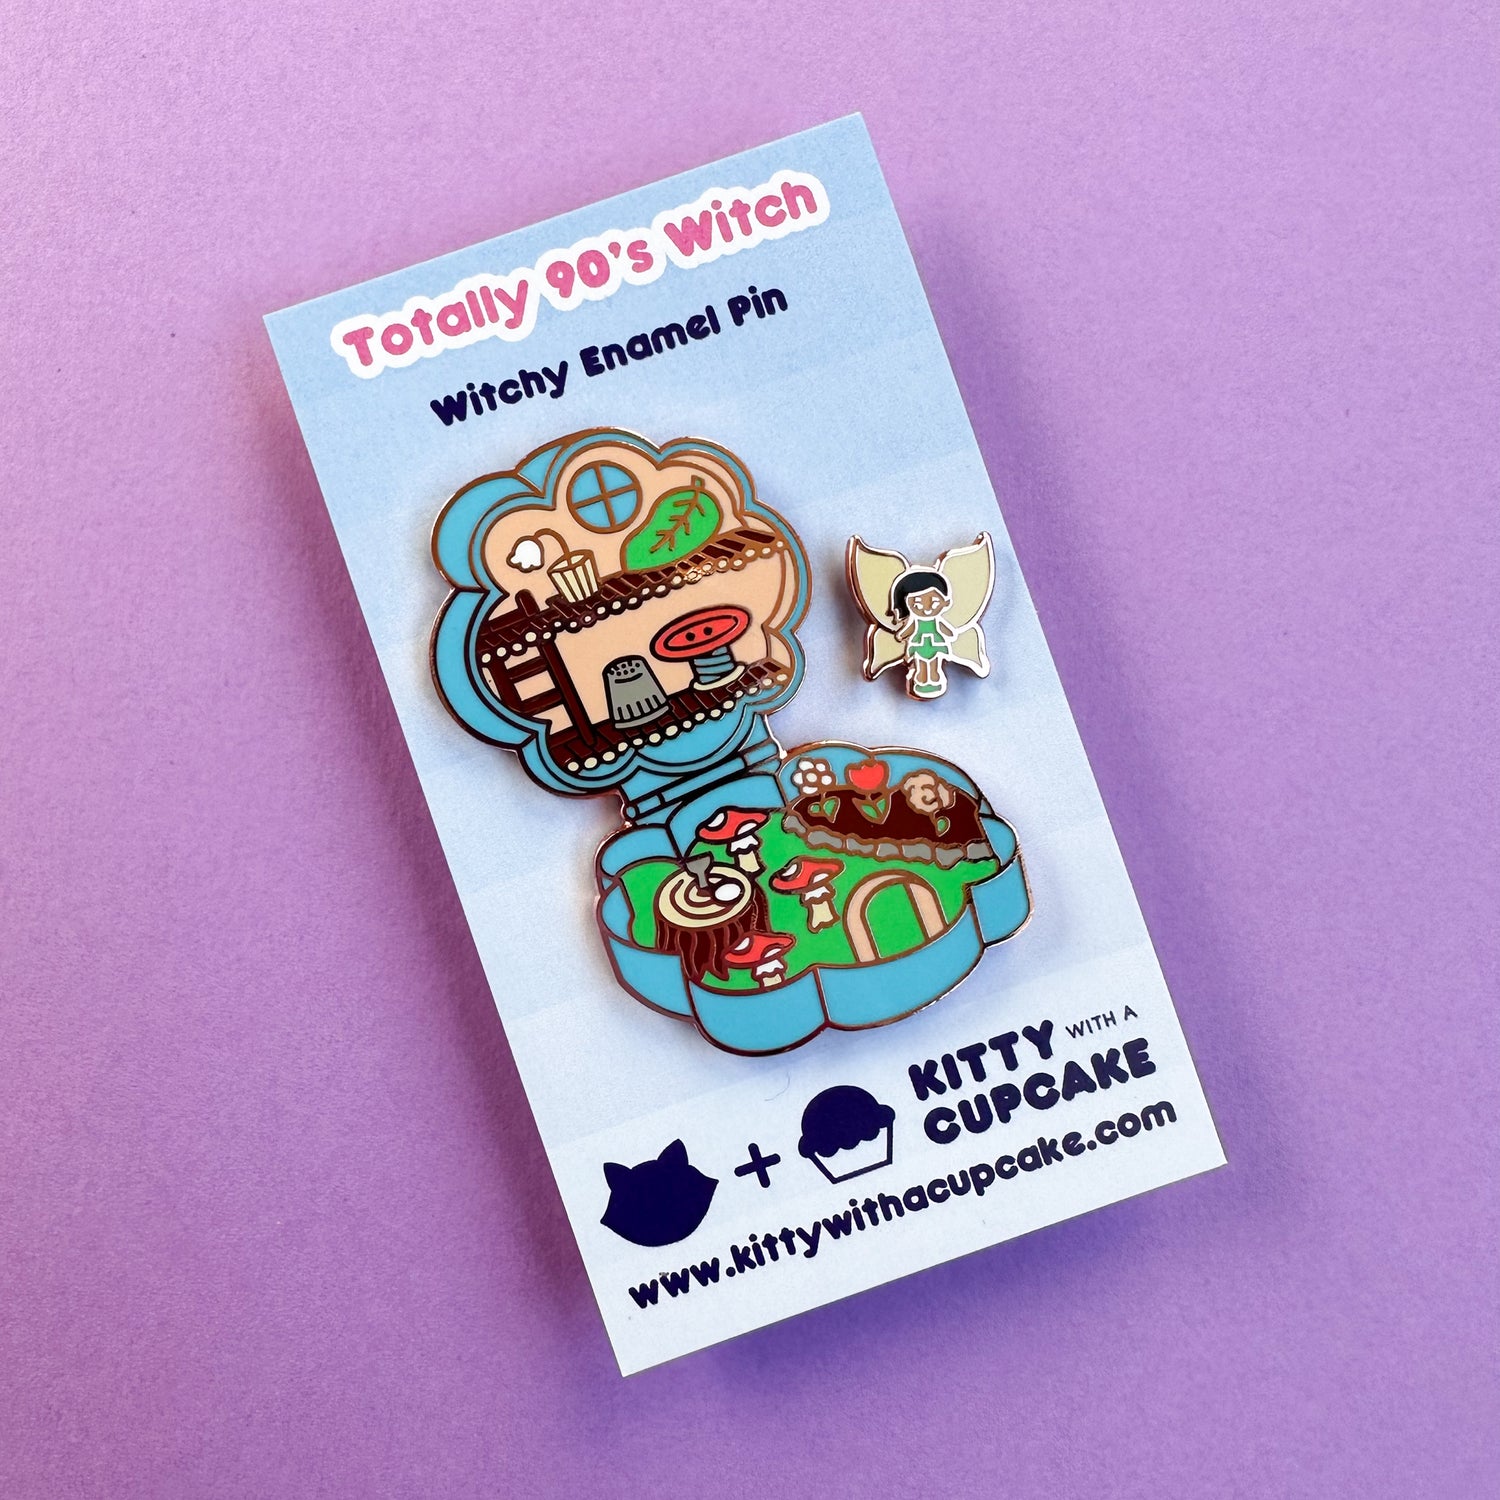 The Fairy Pocket pin set packaged on a backing card that reads "Totally 90's Witch - Witchy Enamel Pin" 